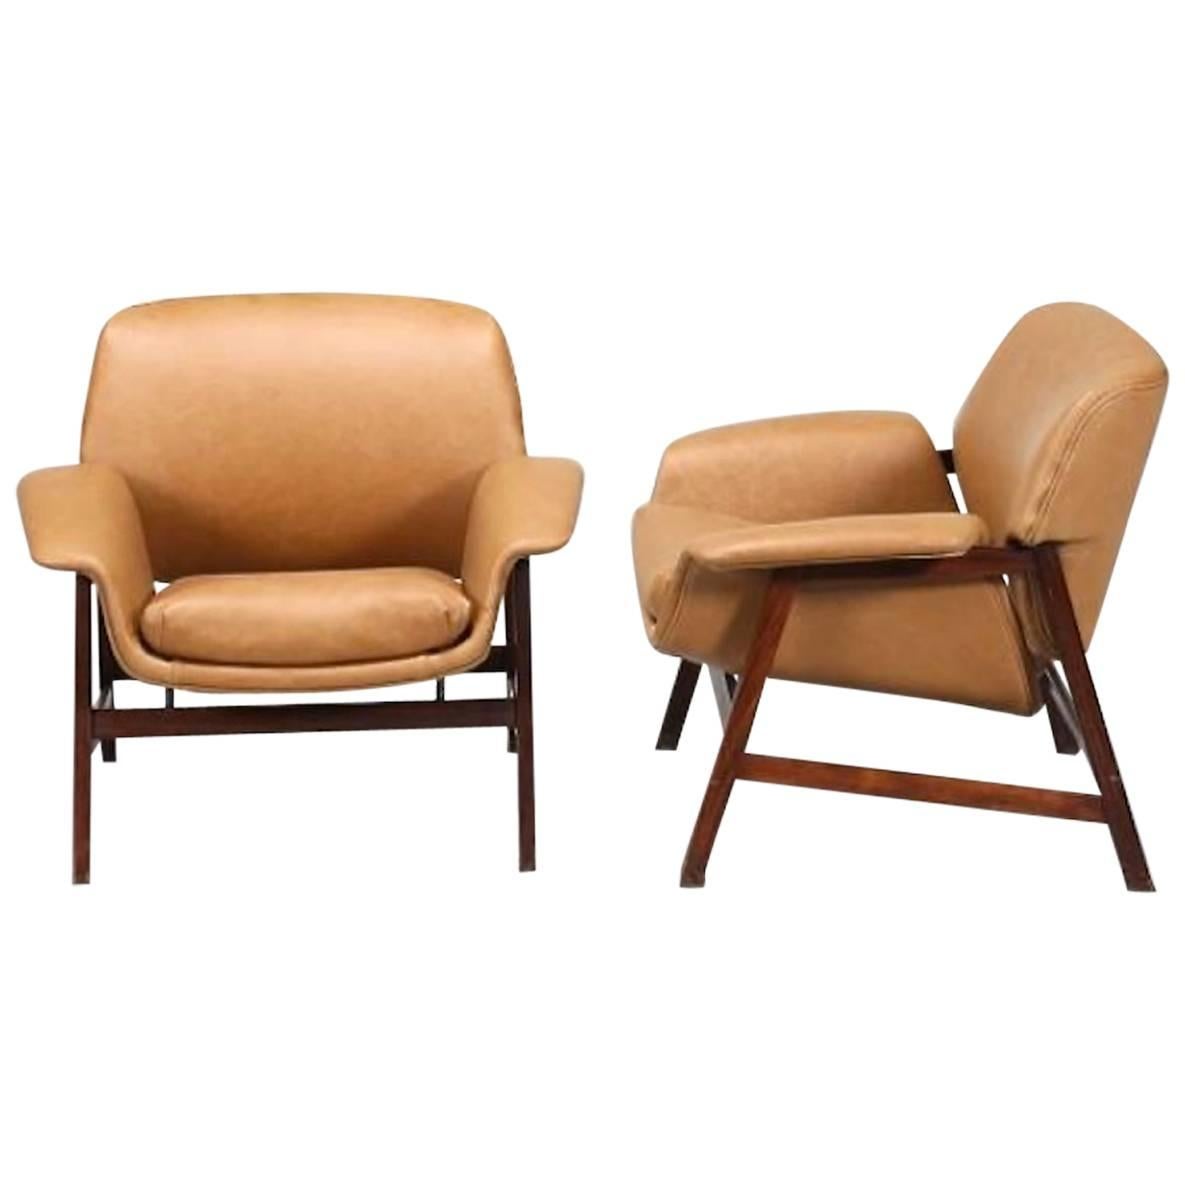 Pair of Gianfranco Frattini Model 849 Leather Lounge Chairs by Cassina